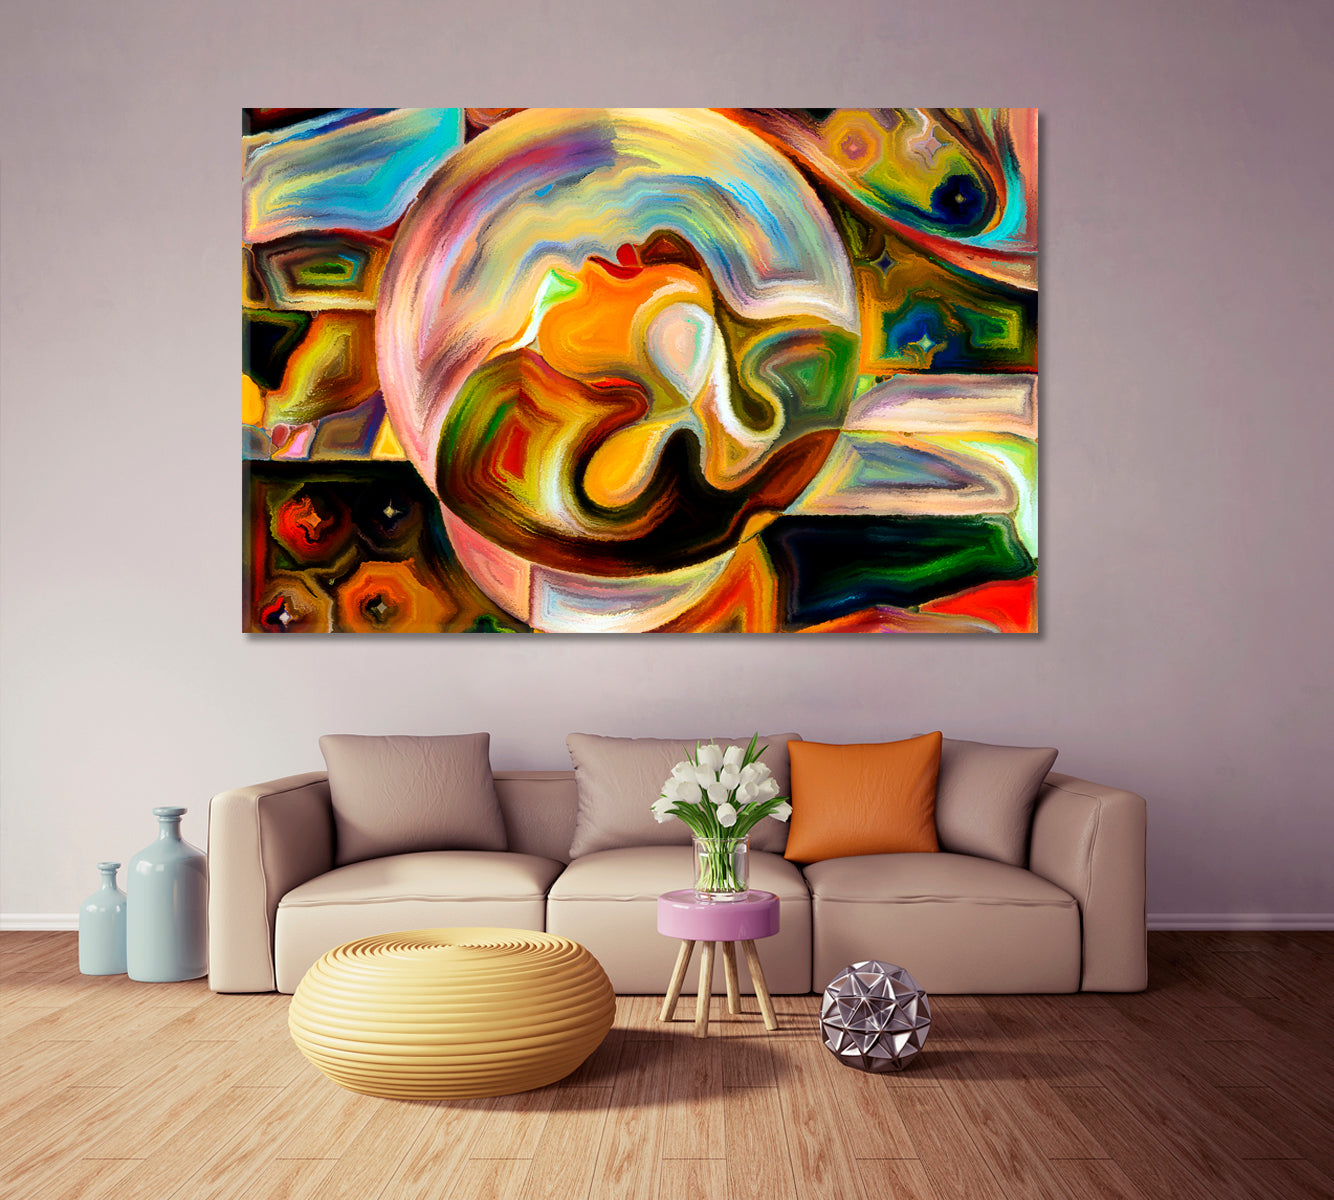 Harmony Microcosm and Macrocosm Colorful Patterns Consciousness Art Artesty 1 panel 24" x 16" 